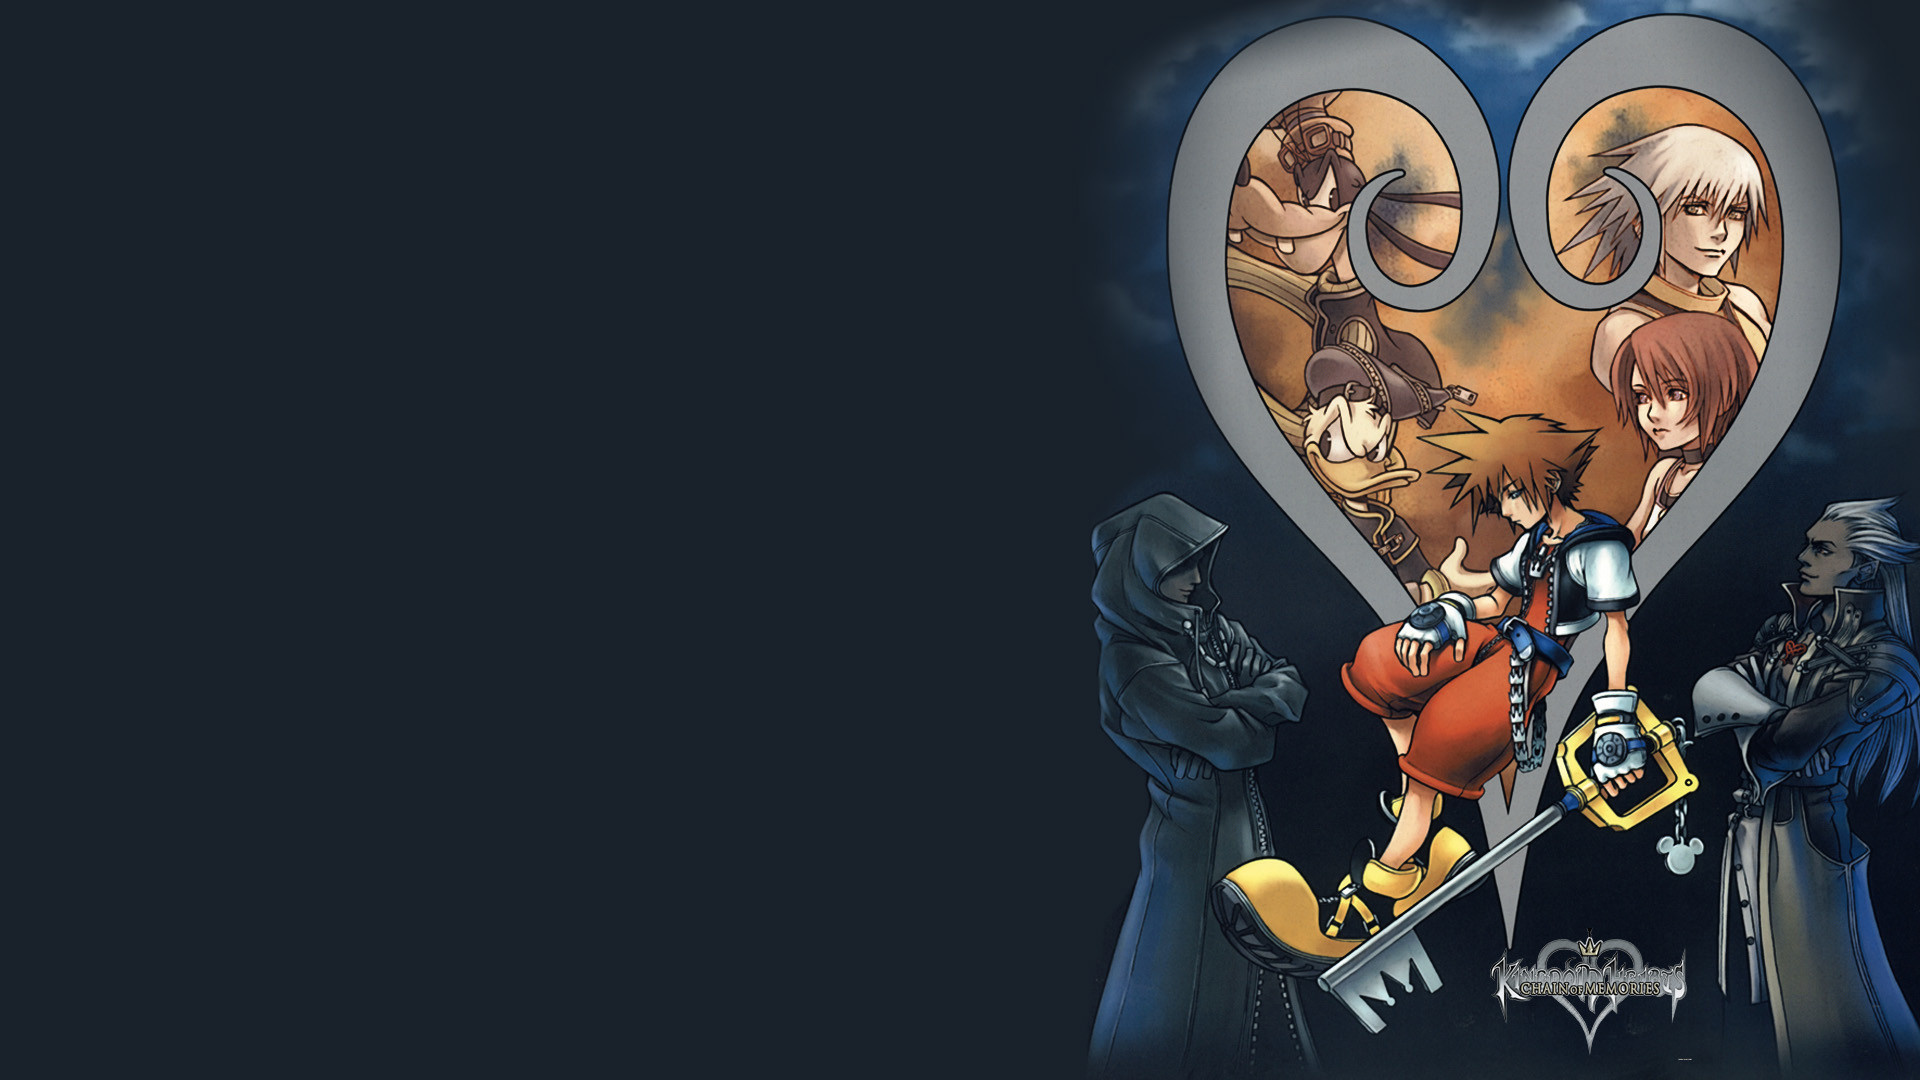 Kingdom Hearts 2 Final Mix, Background pictures, 1920x1080 Full HD Desktop